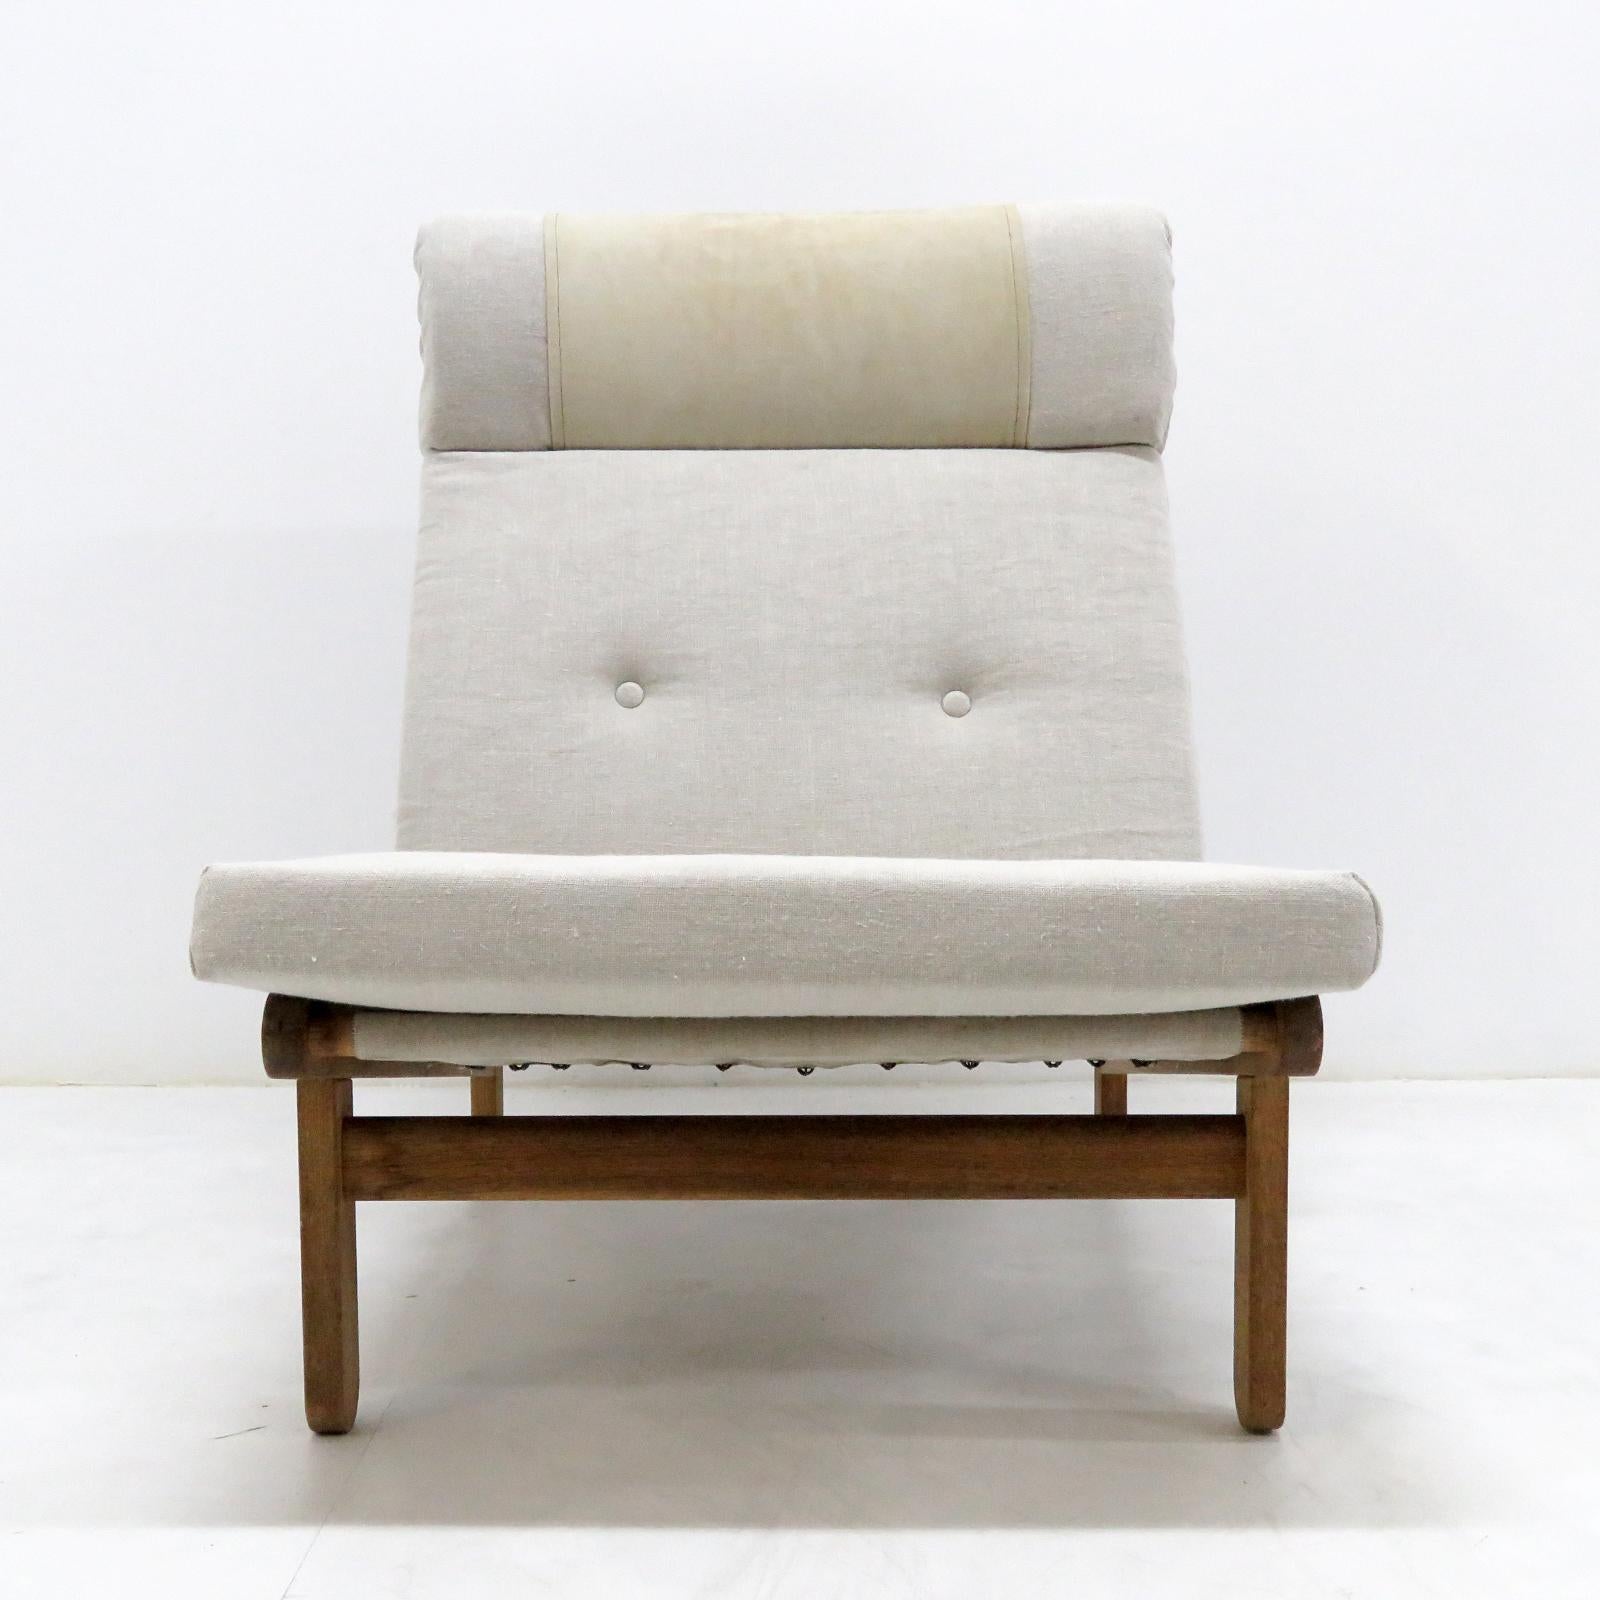 Bold and comfortable pair of Danish modern lounge chairs and ottoman 'Kludestolen' by Bernt Petersen, Denmark, 1970, oversized oak frames with newly upholstered off-white linen cushions on original canvas.